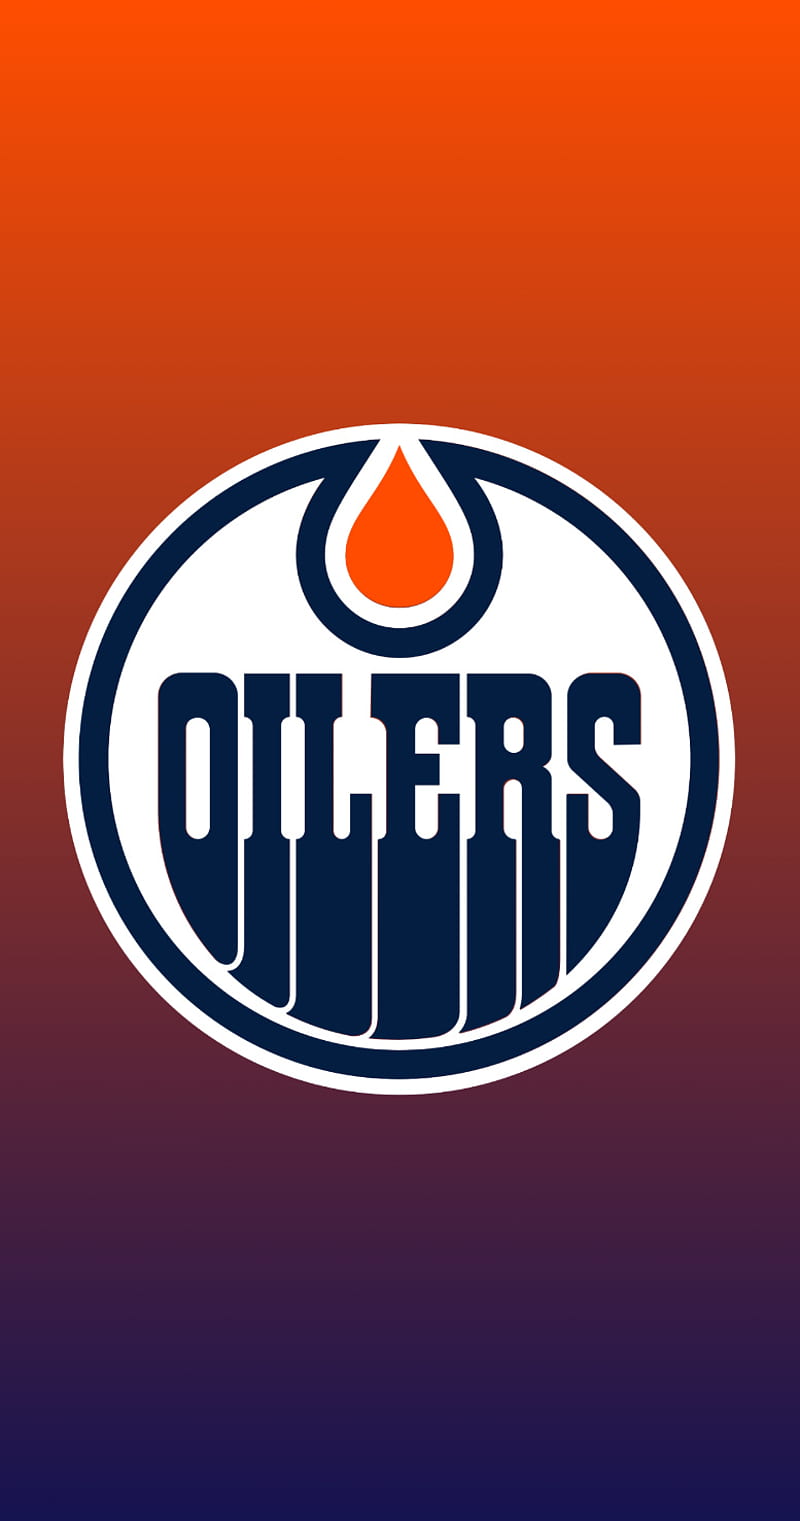 I made a phone wallpaper for the Oilers hope you guys like it  r EdmontonOilers